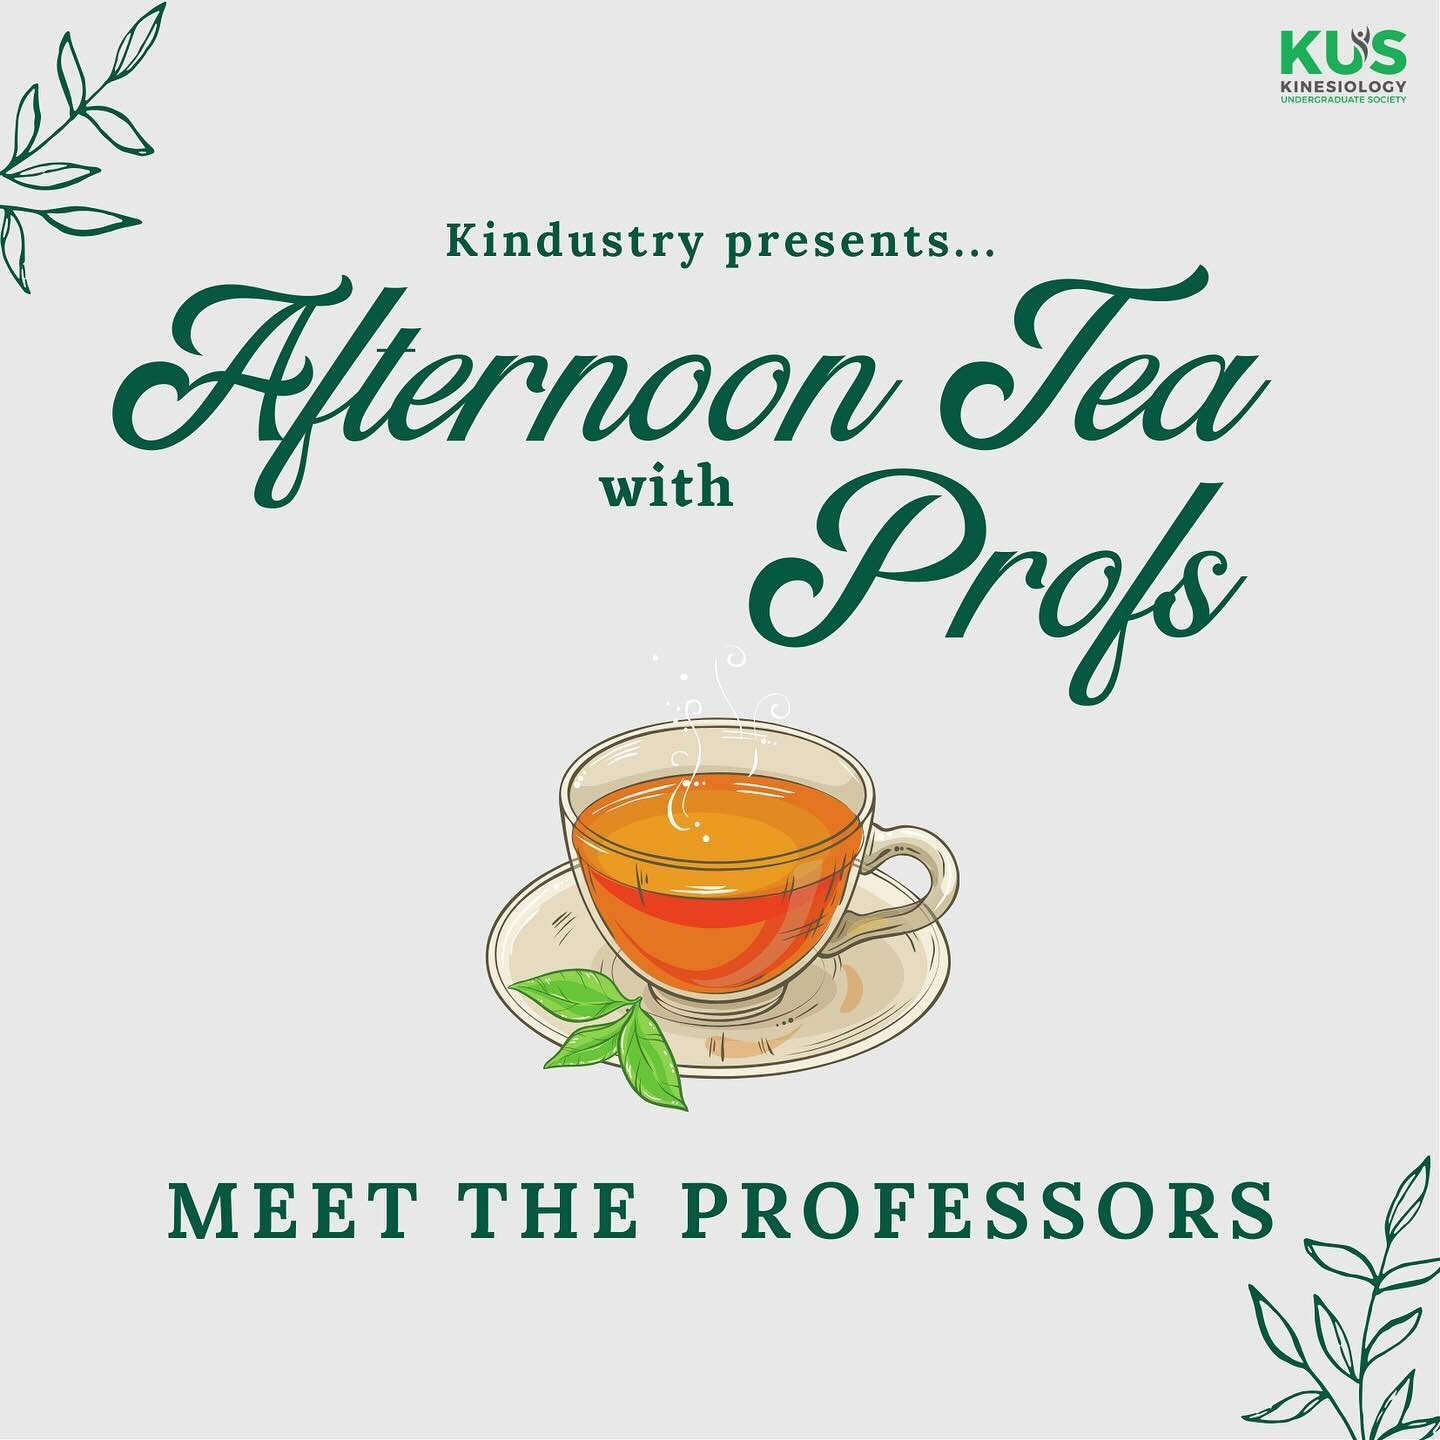 Afternoon Tea with Profs is happening this Wednesday from 1:30-2:30PM, and you don&rsquo;t want to miss it! ☕️ This event is the perfect opportunity to network with some of our amazing Kin professors and learn all about academics, research, and your 